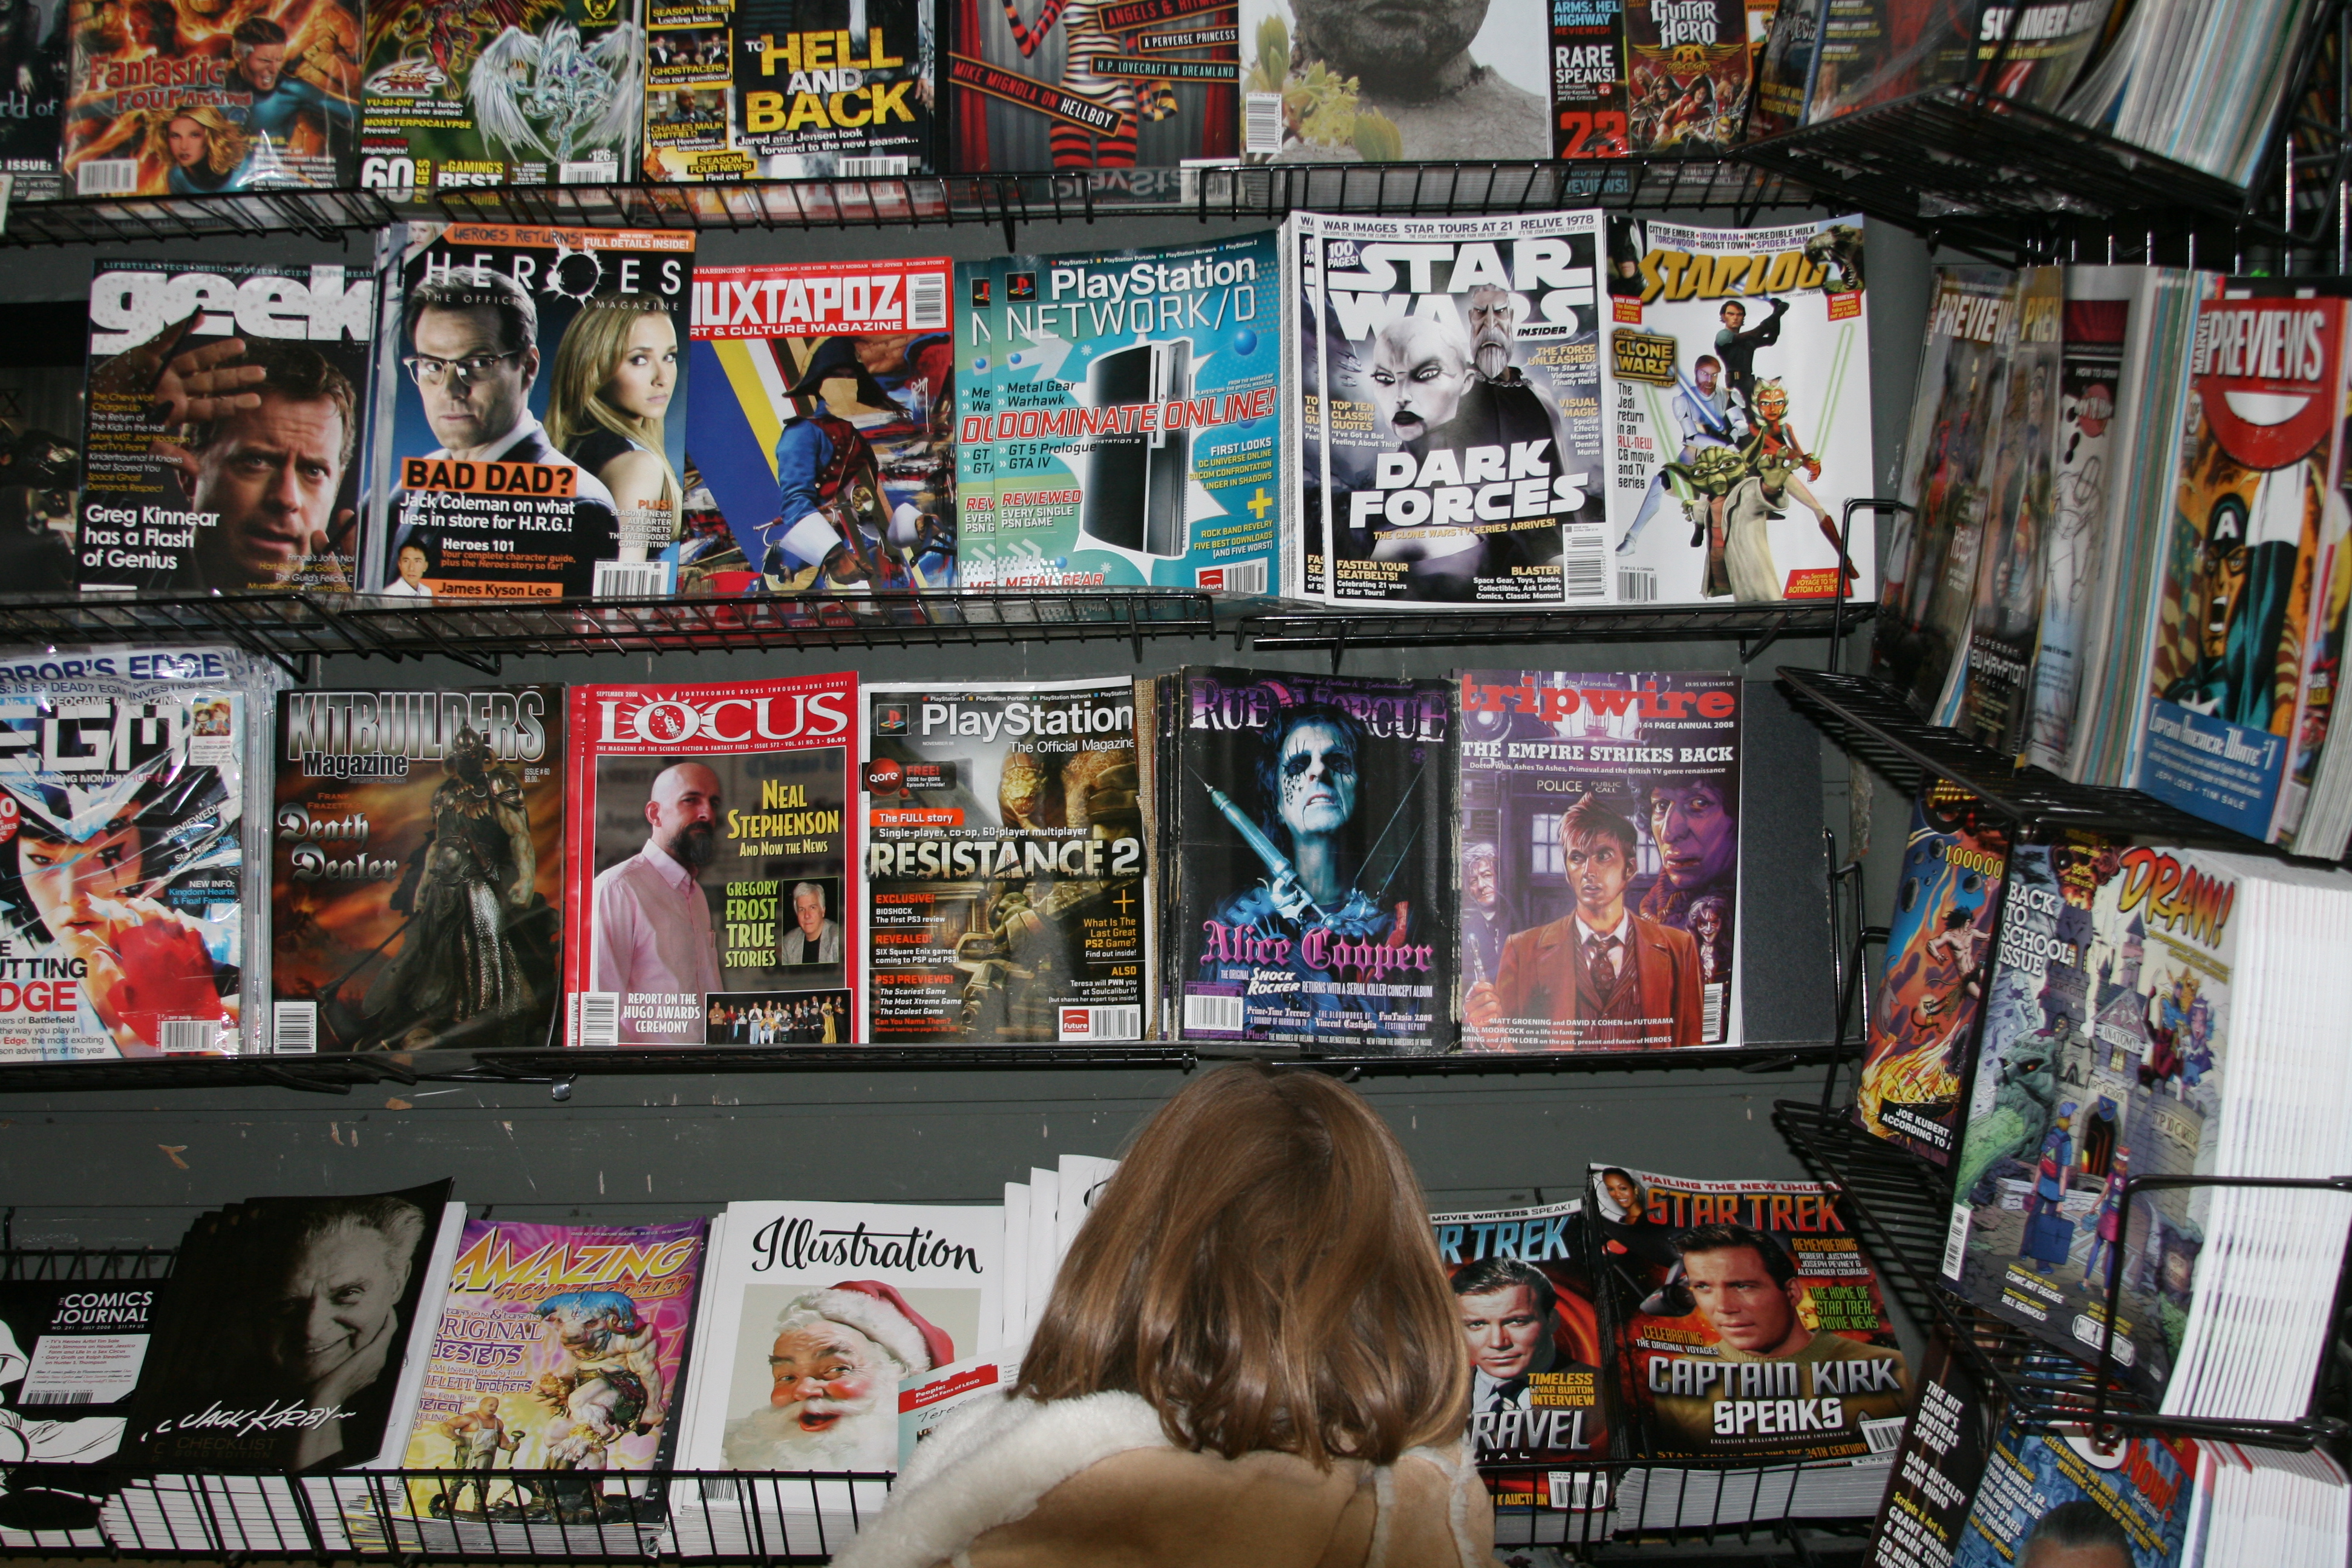 Kelly checking out Tripwire in Midtown Comics’ Magazine Section